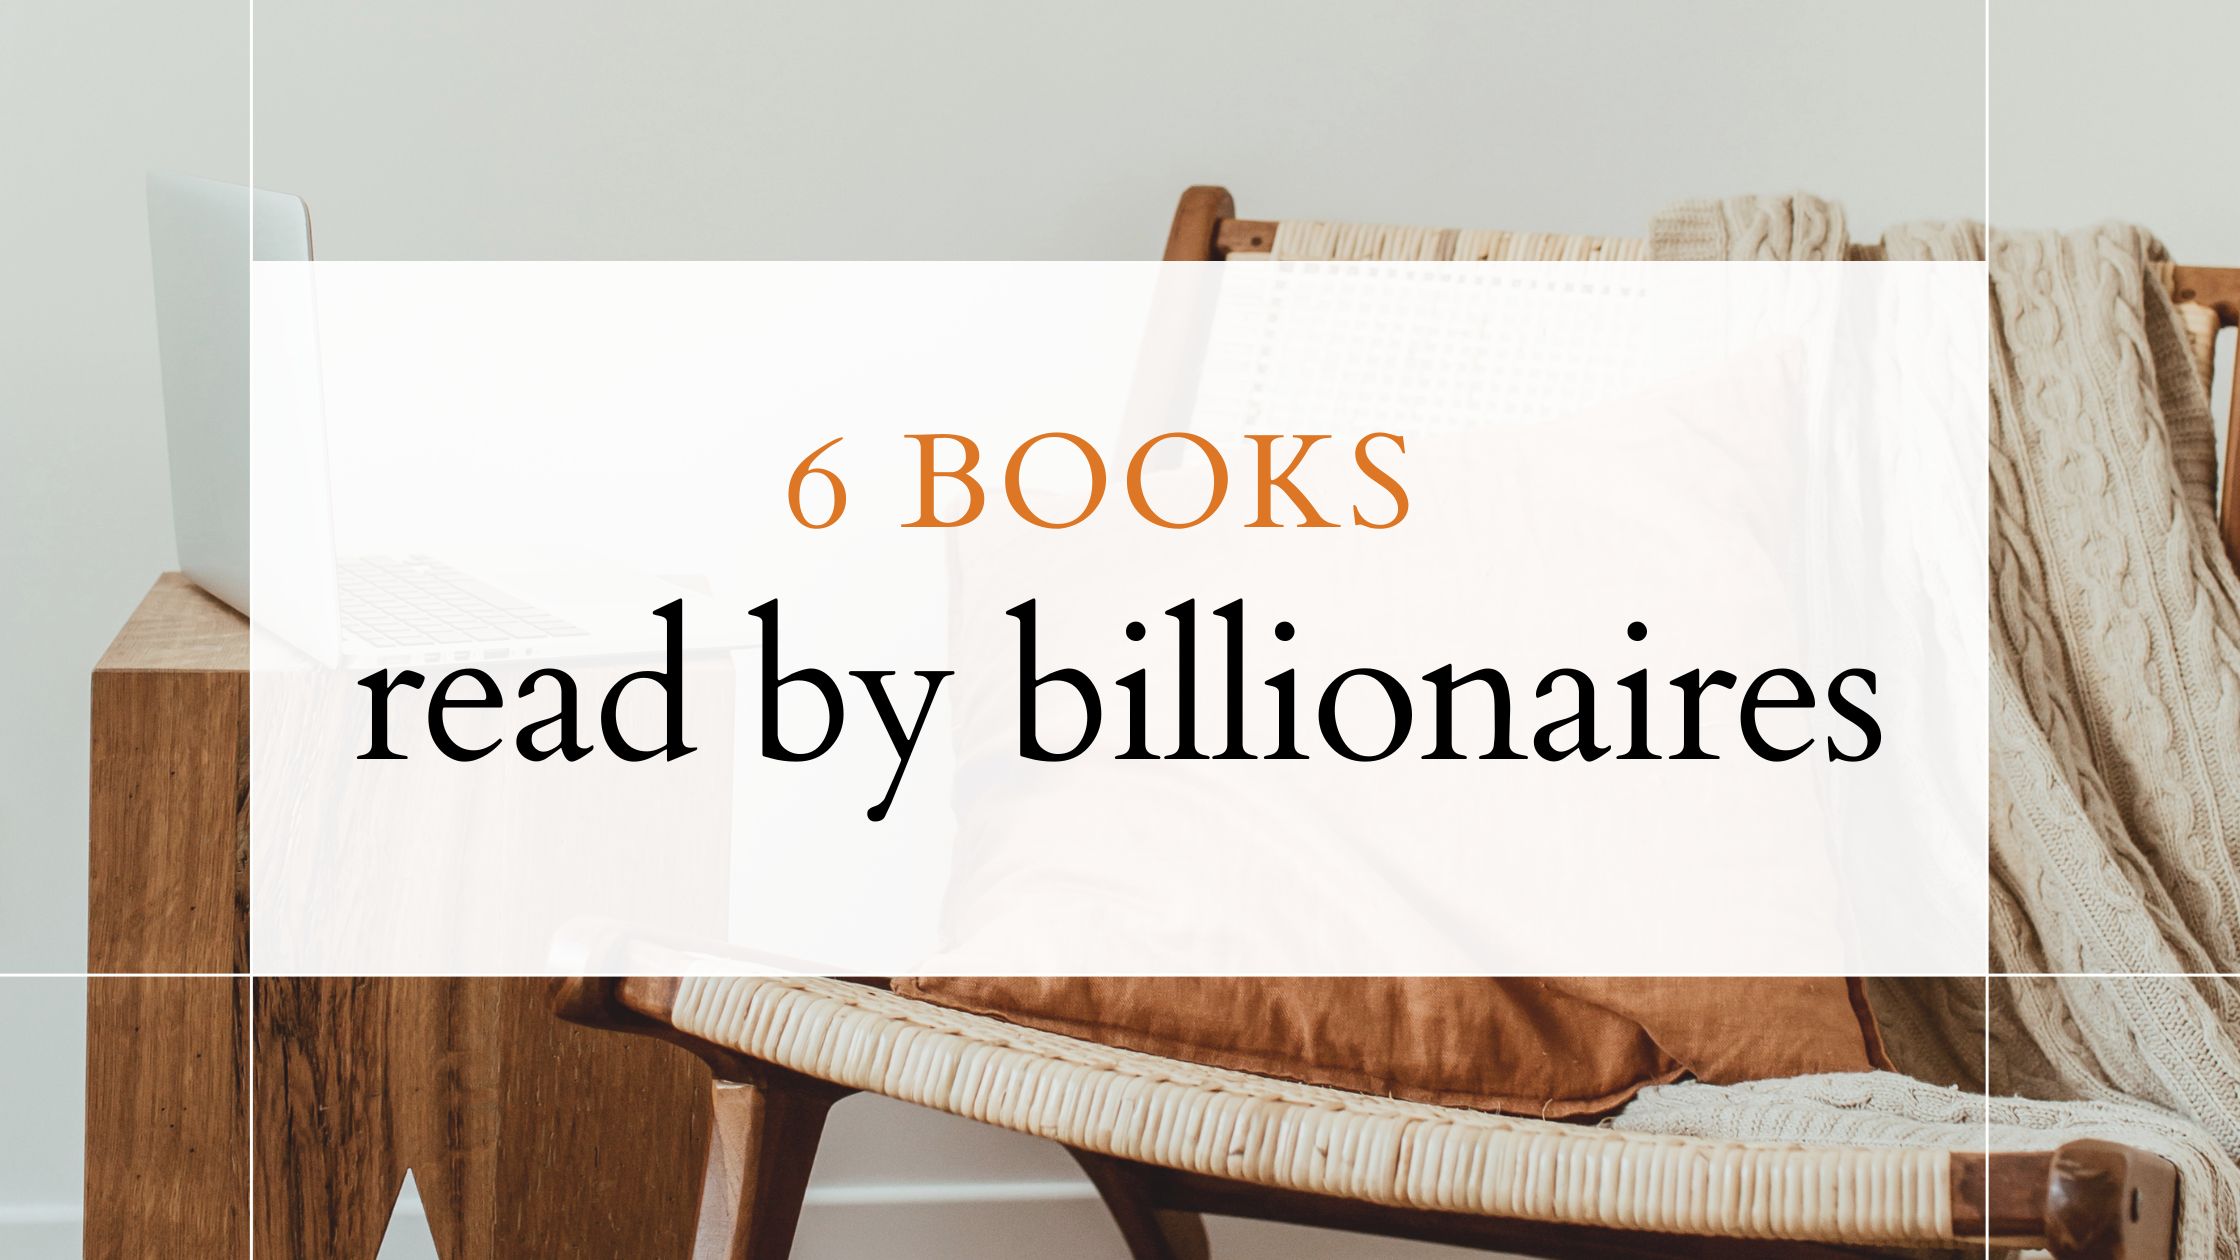 6 books read by billionaires